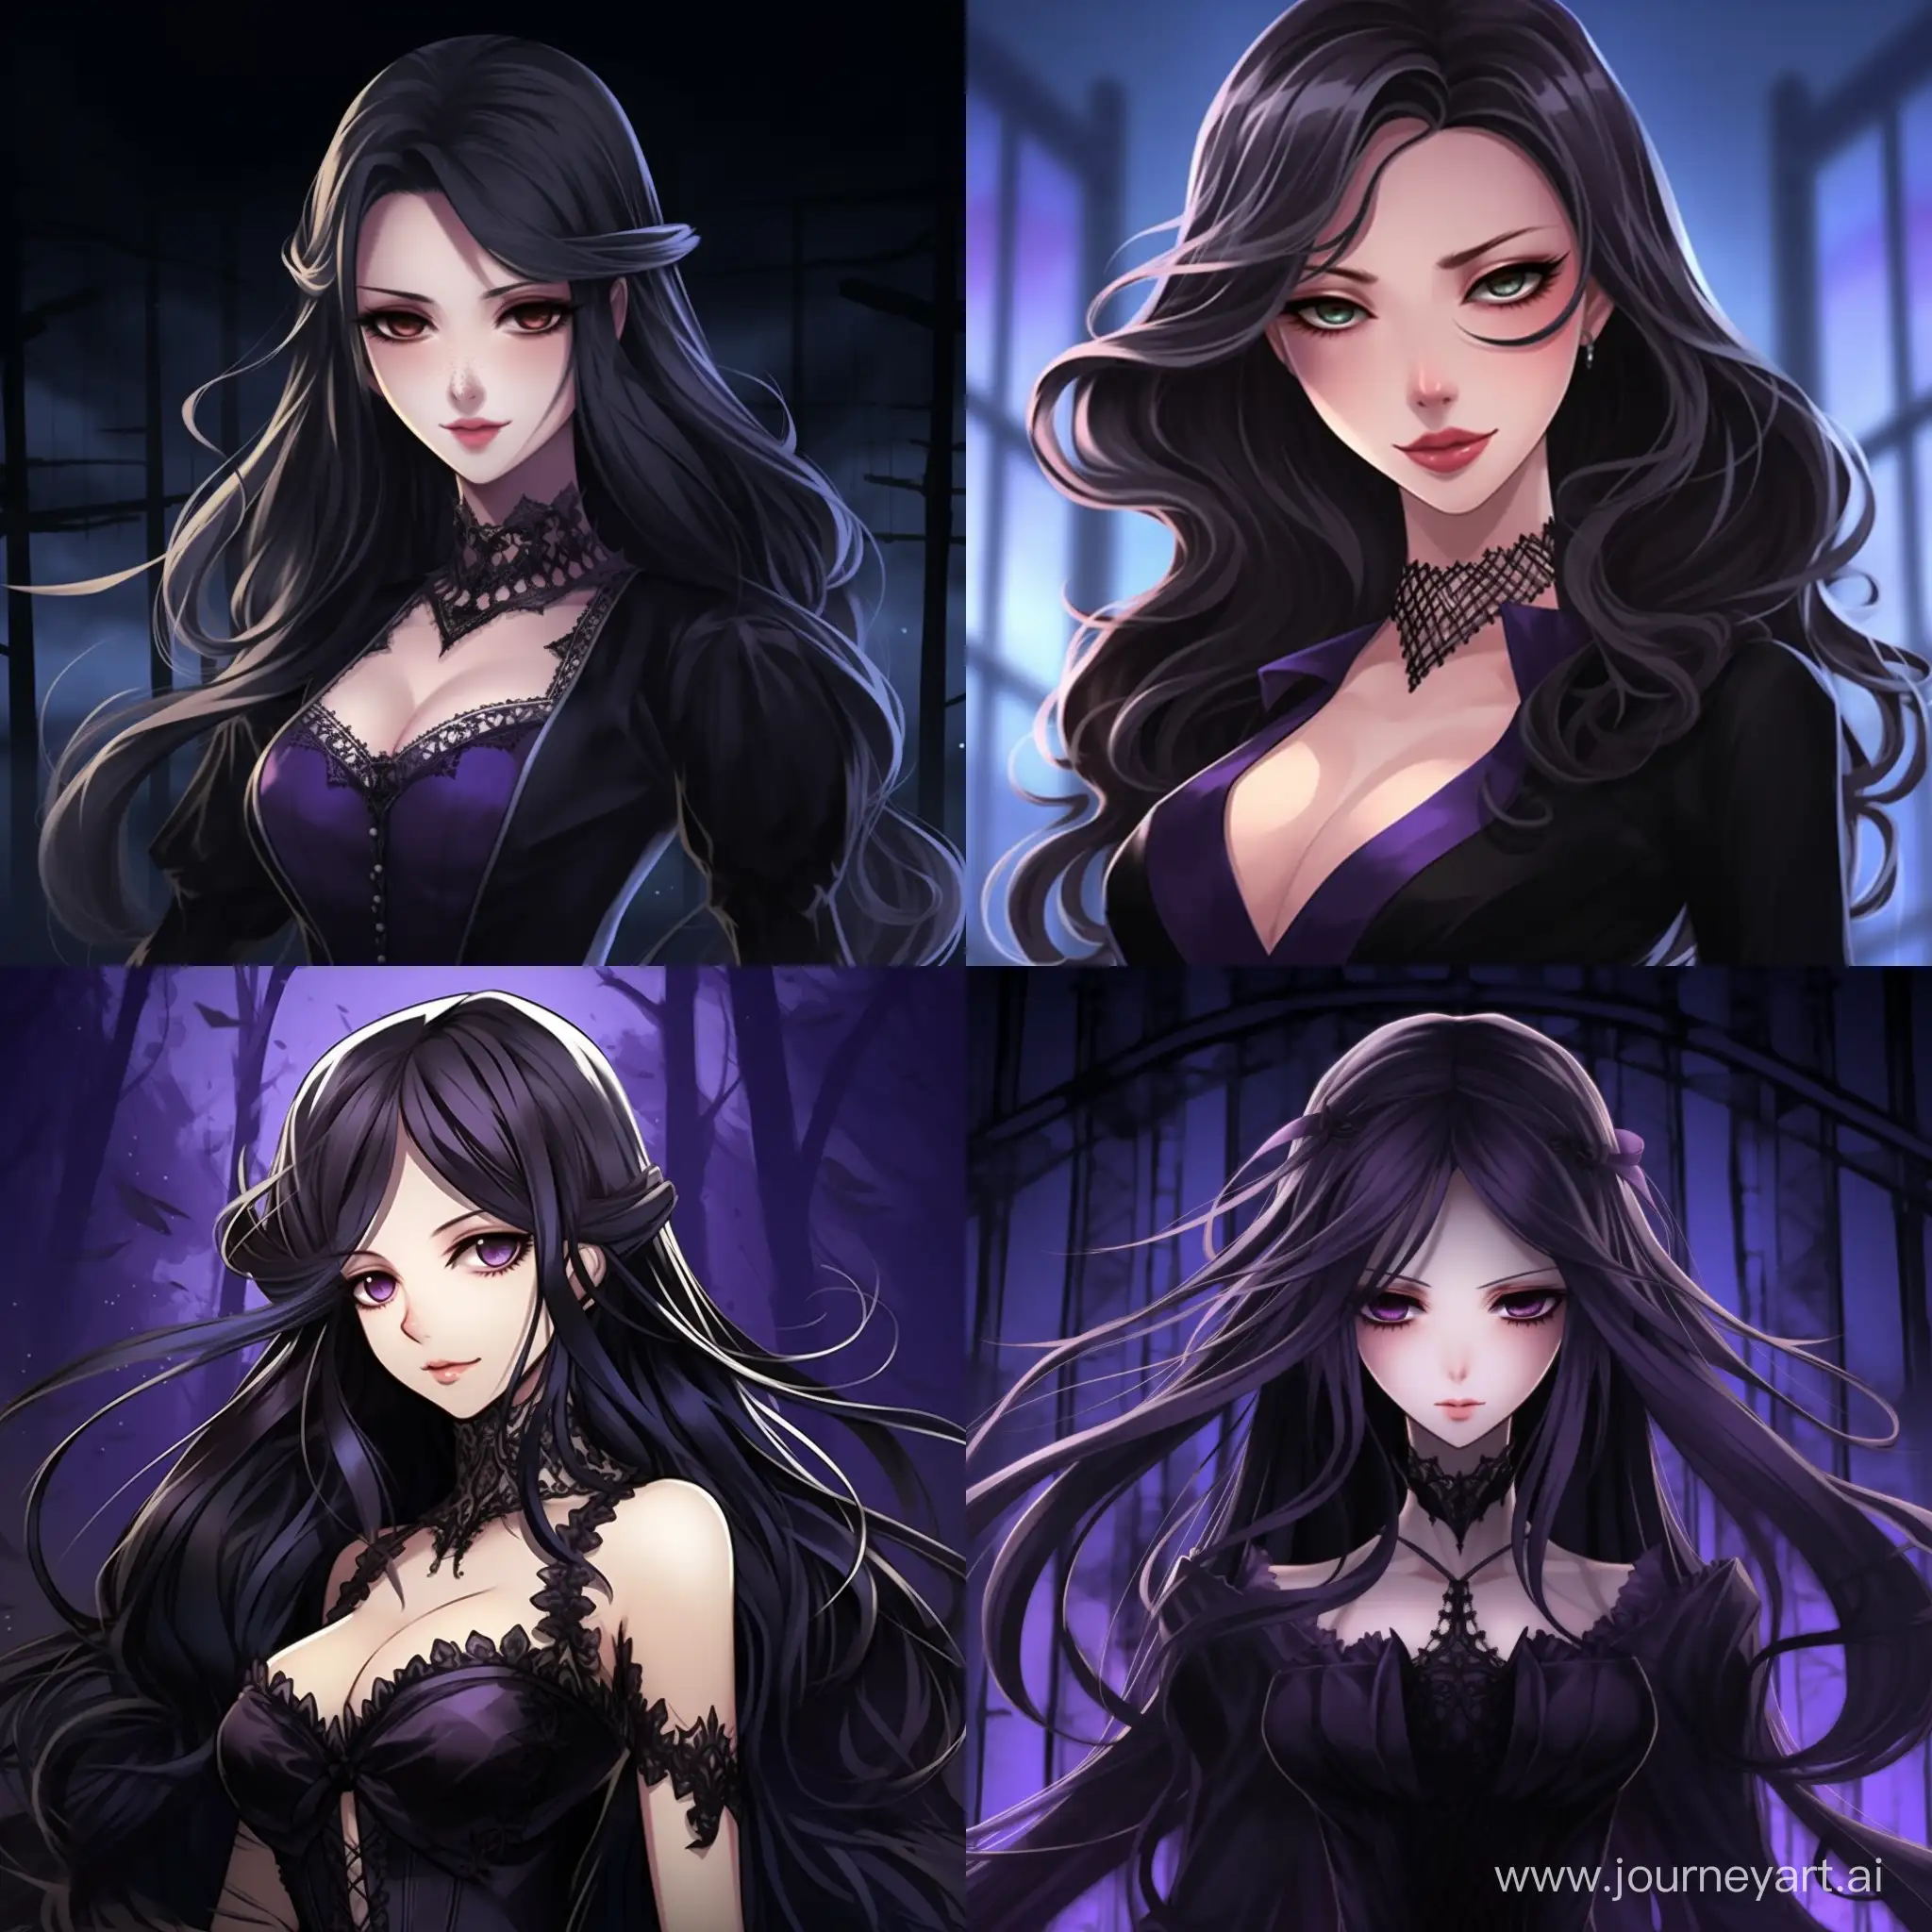 Generate an anime vampire adult woman with long straight Black hair, purple eyes, open mouth with sharp Canines, Black and purple long luxorious dress